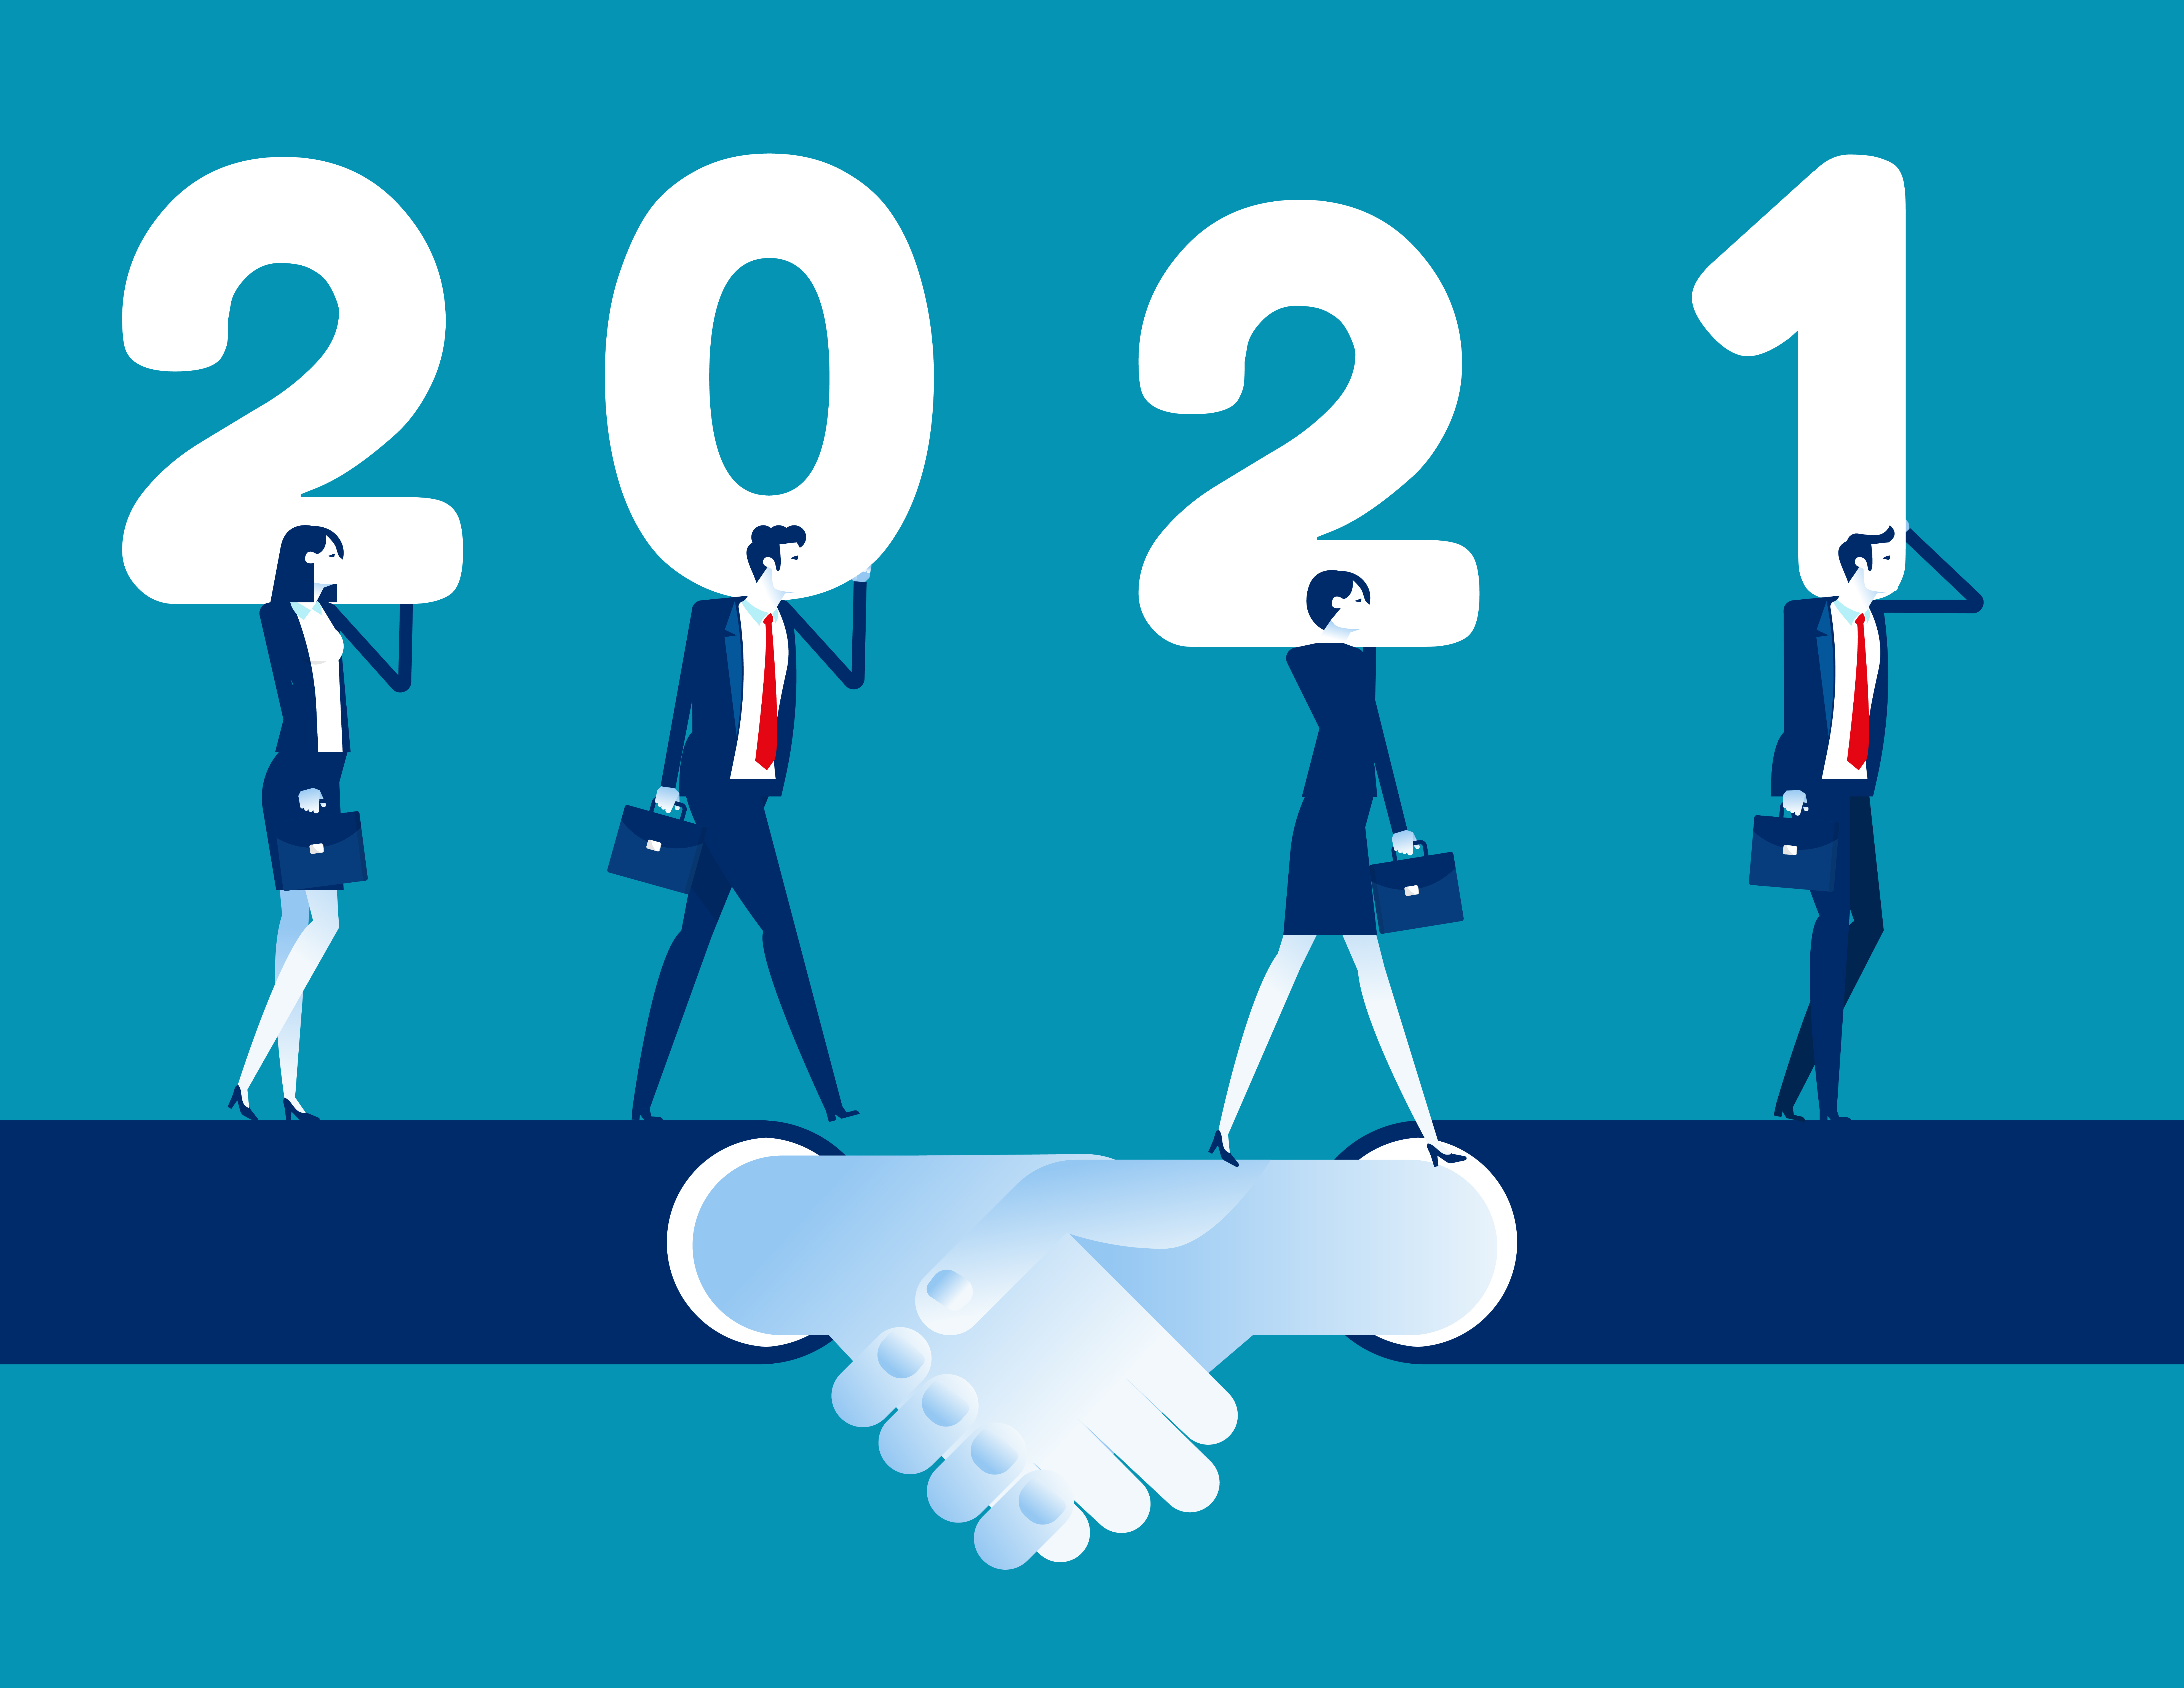 Business team walk together on shaking hand and hold number 2021